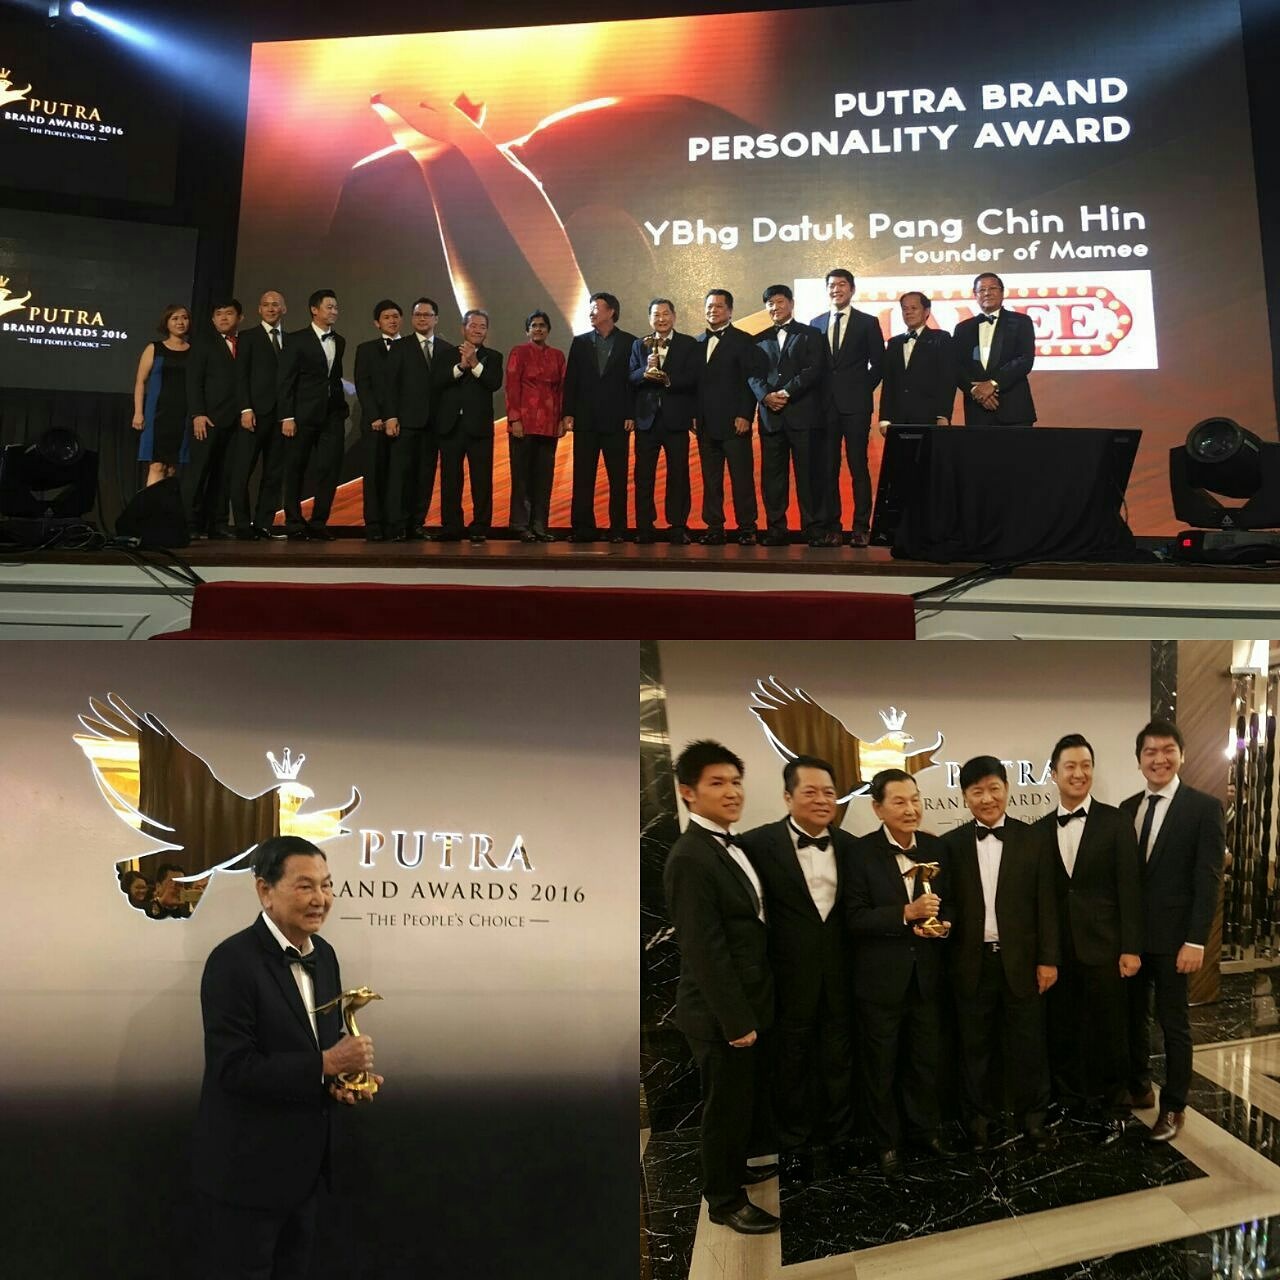 Datuk Pang was also awarded the Putra Brand Personality Award back in 2016. Image credit: MAMEE